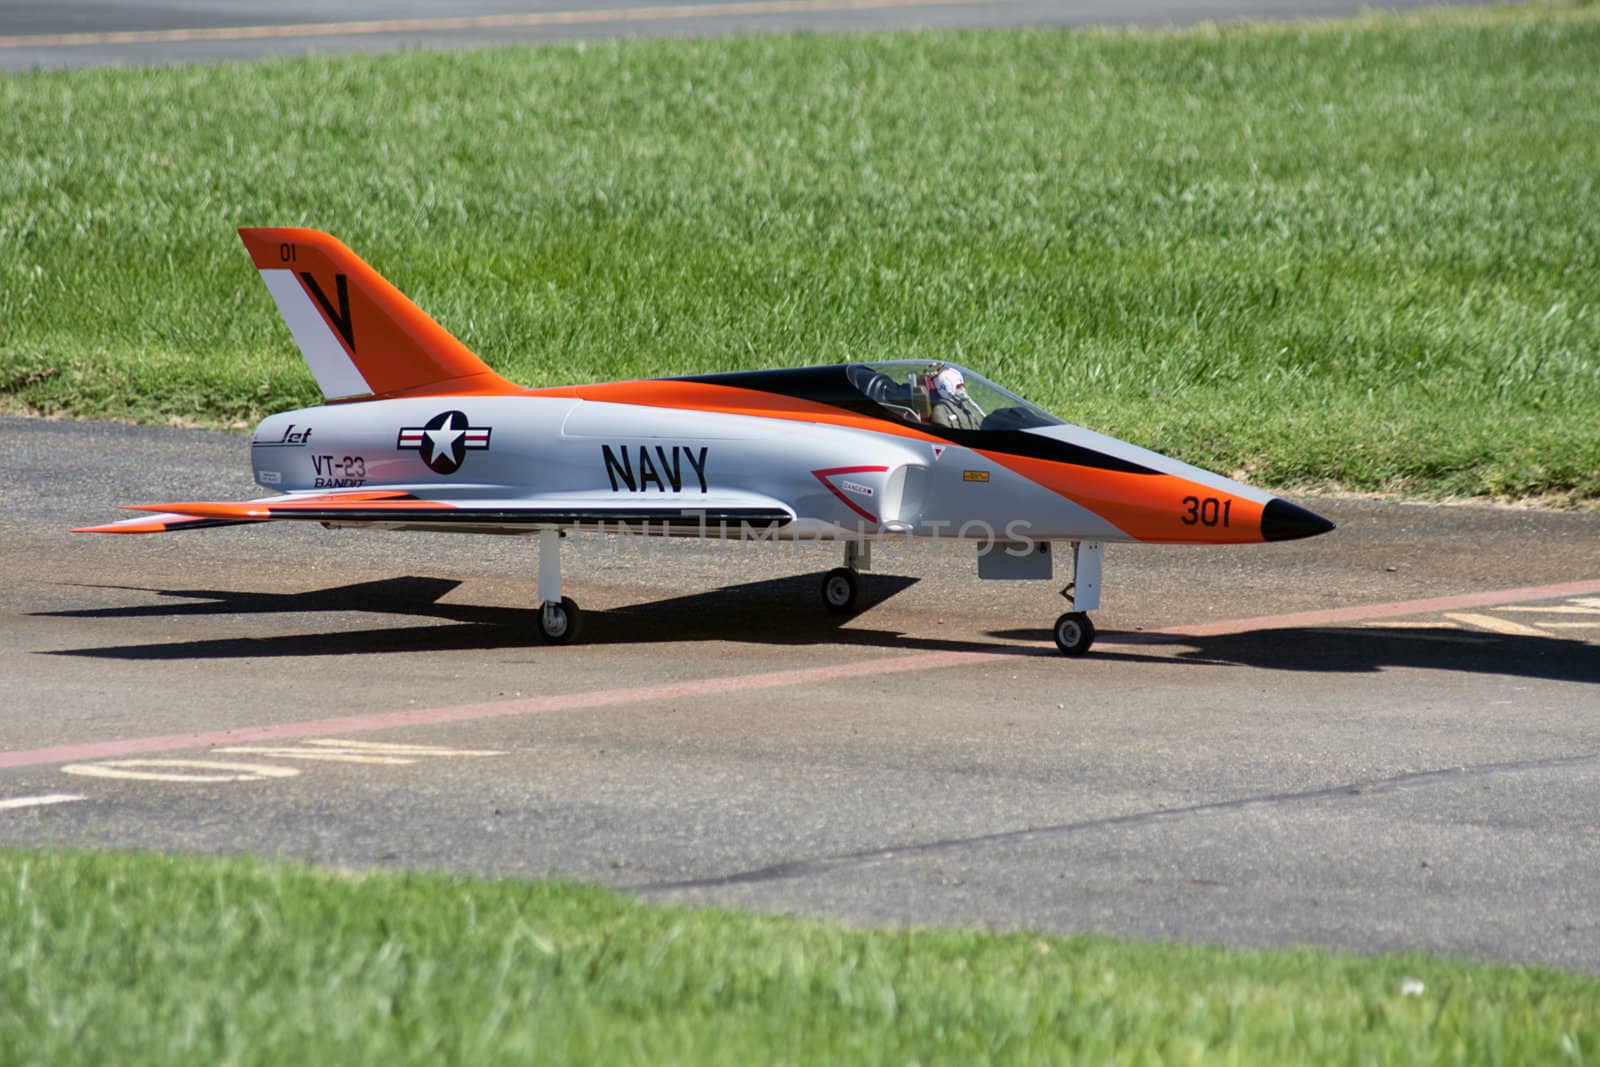 RC remote controlled Real Jet airplane model in action